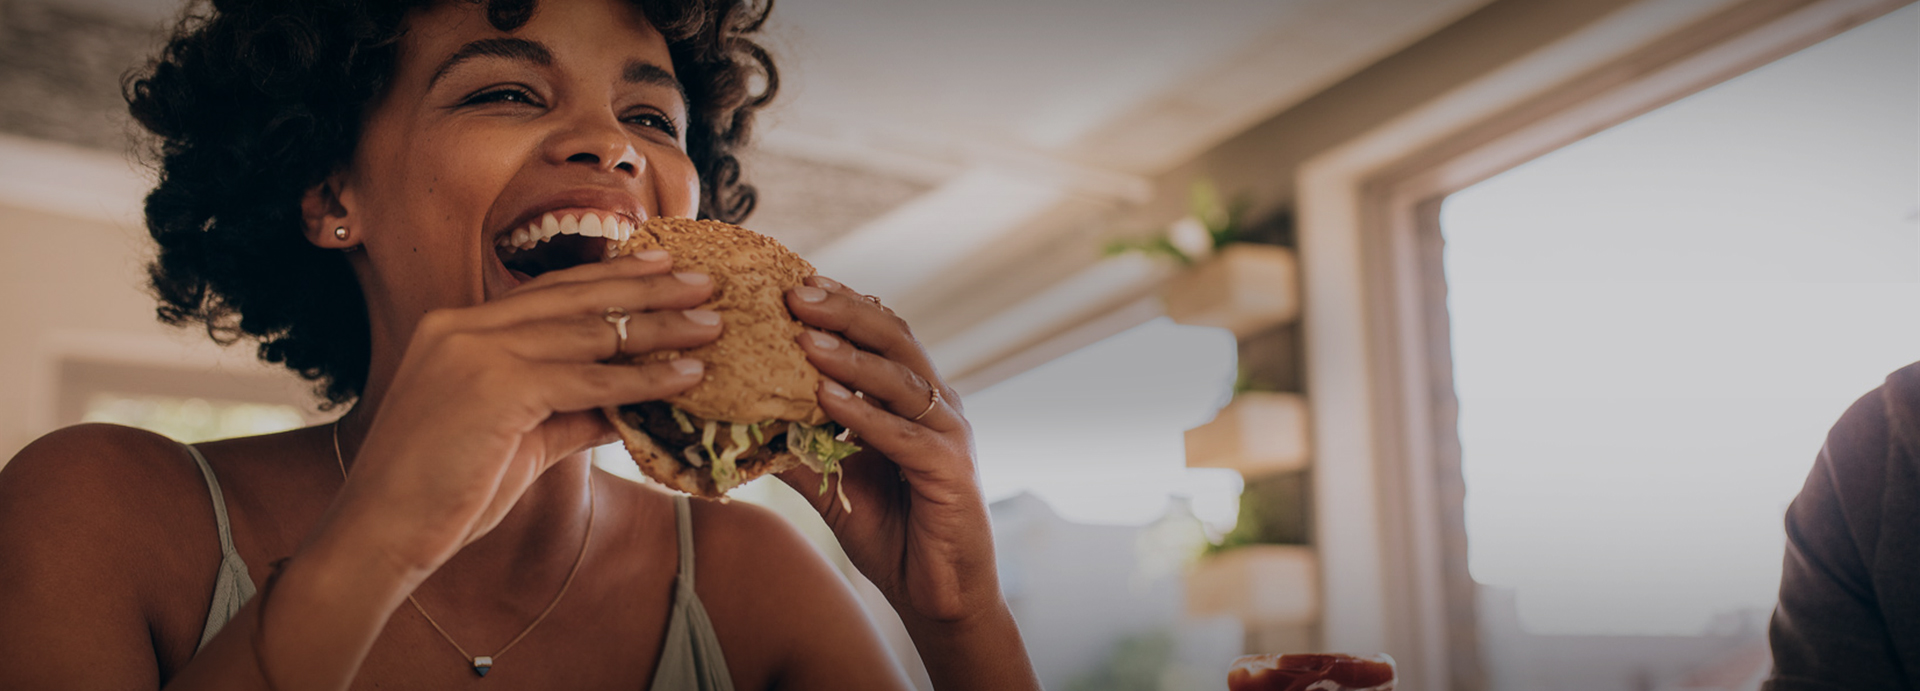 woman taking a bite from a juicy burger